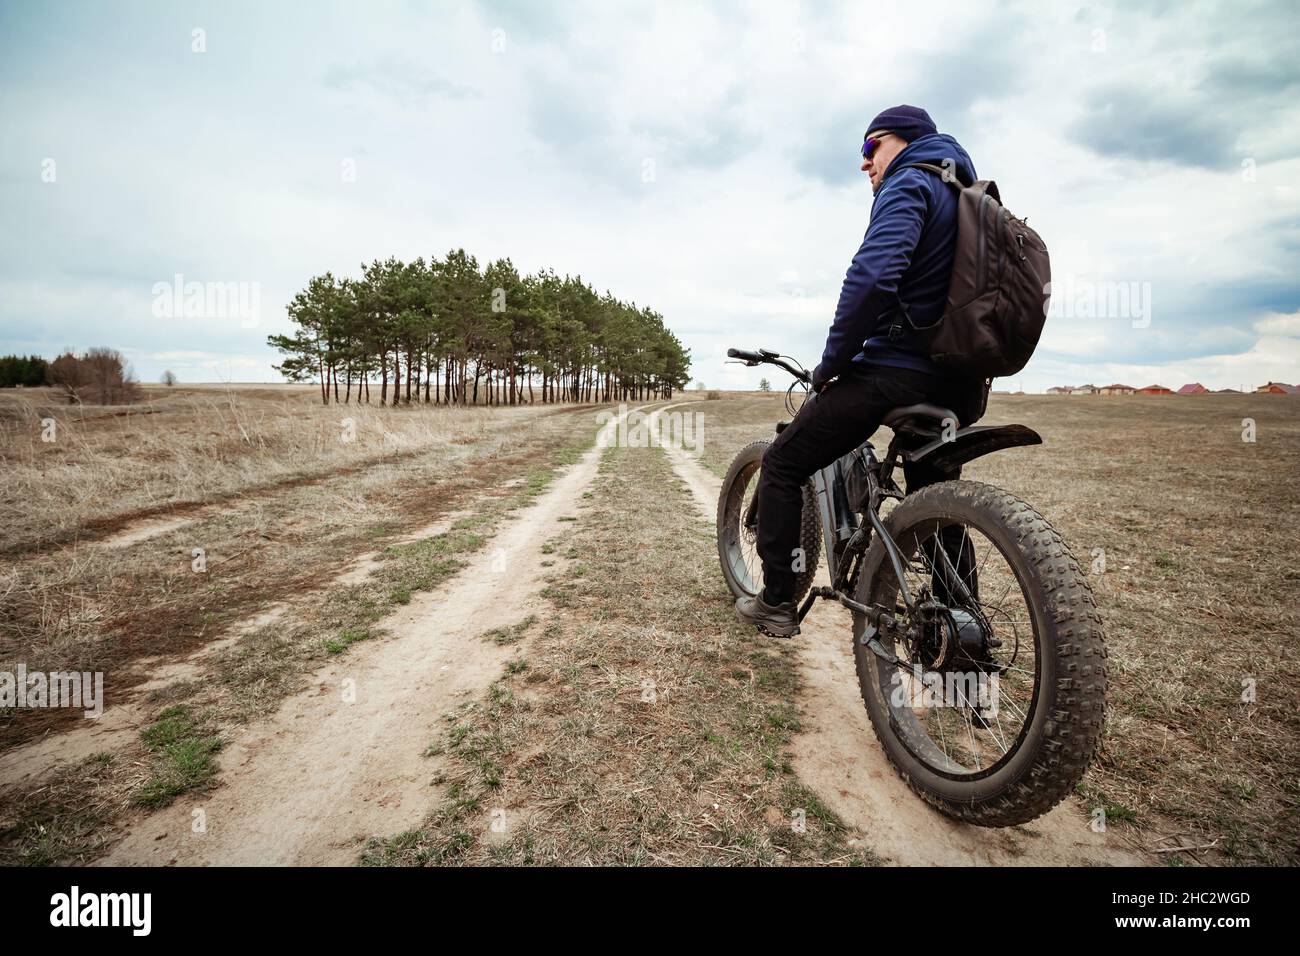 A man on a bicycle with thick wheels and an electric motor. Rural area. Stock Photo